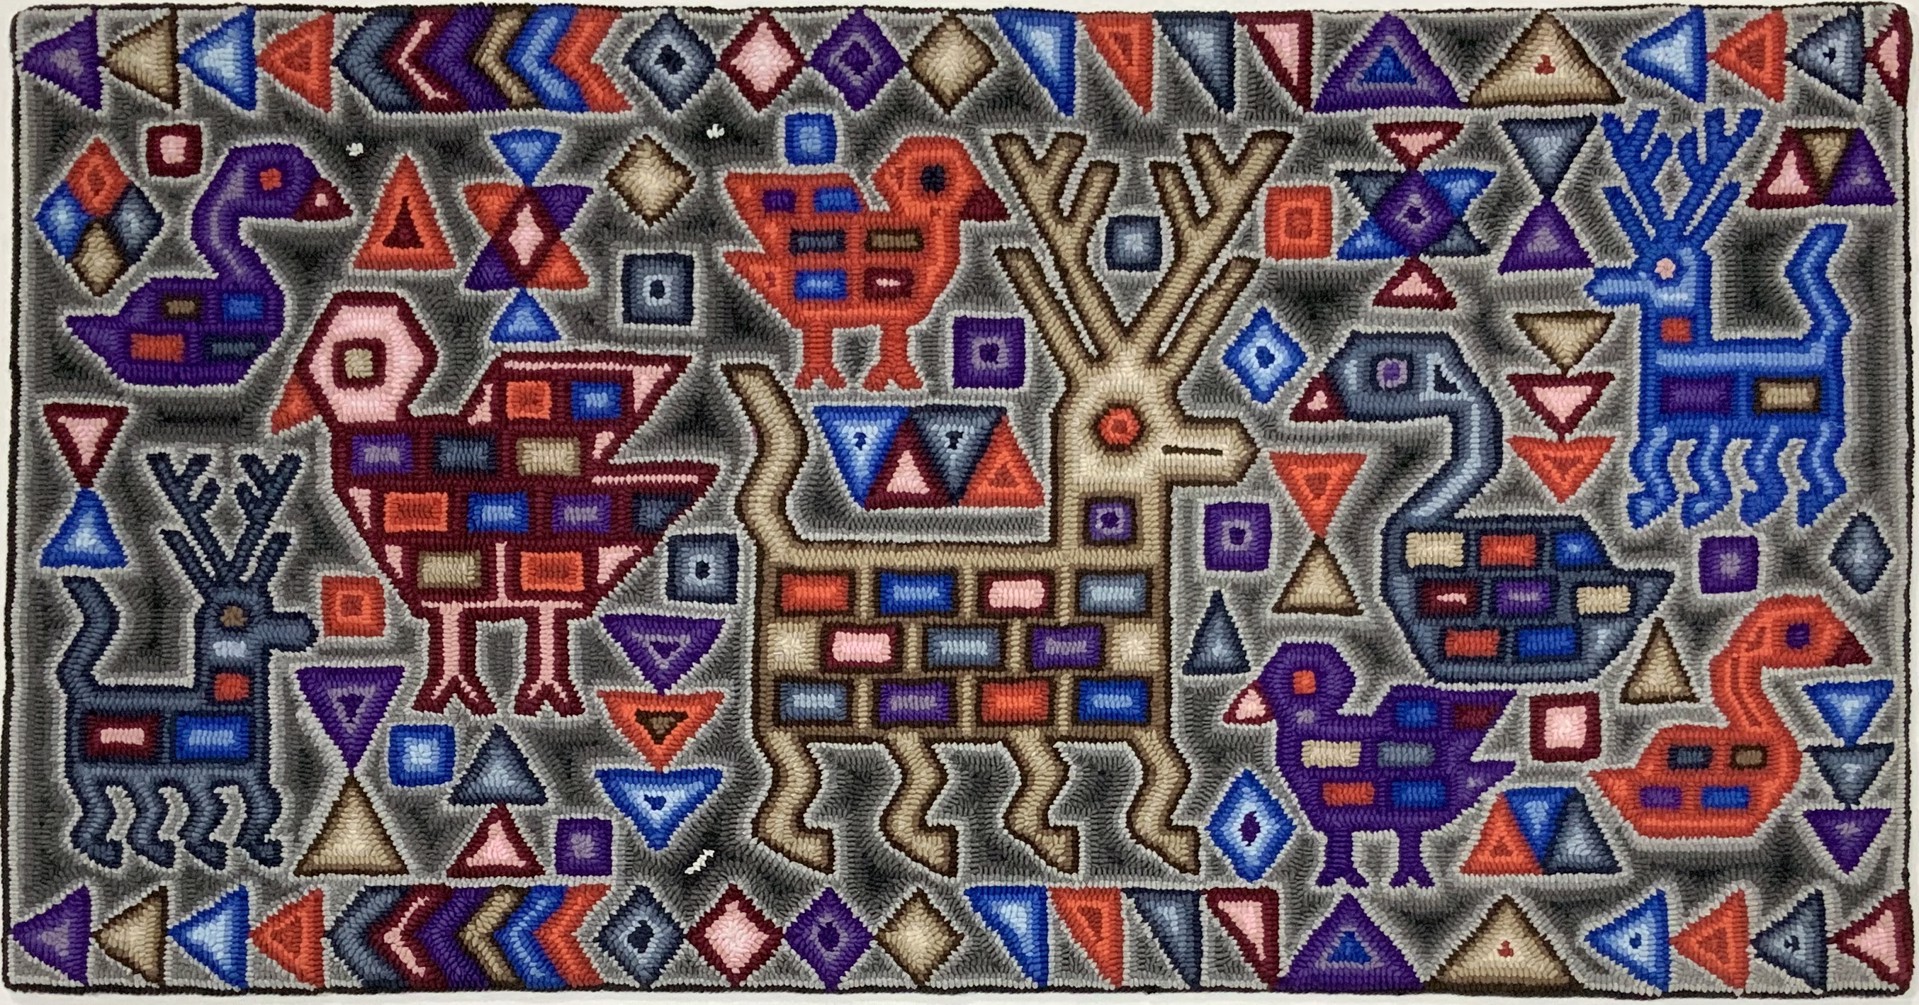 Creatures of Nahualá by Multicolores